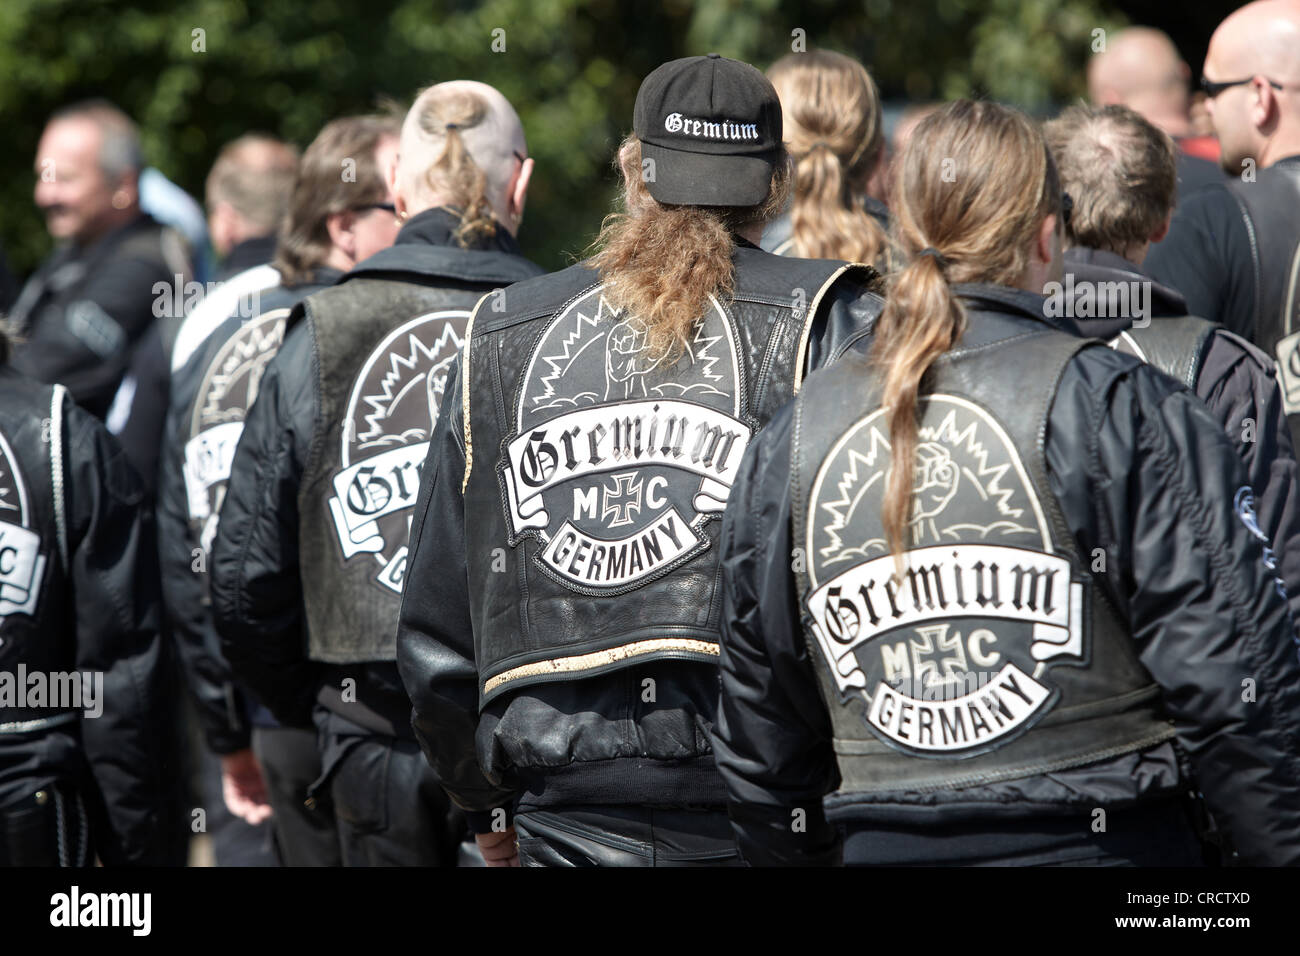 Members of the Gremium Motorcycle Club, funeral procession for a deceased member, Koblenz, Rhineland-Palatinate, Germany, Europe Stock Photo